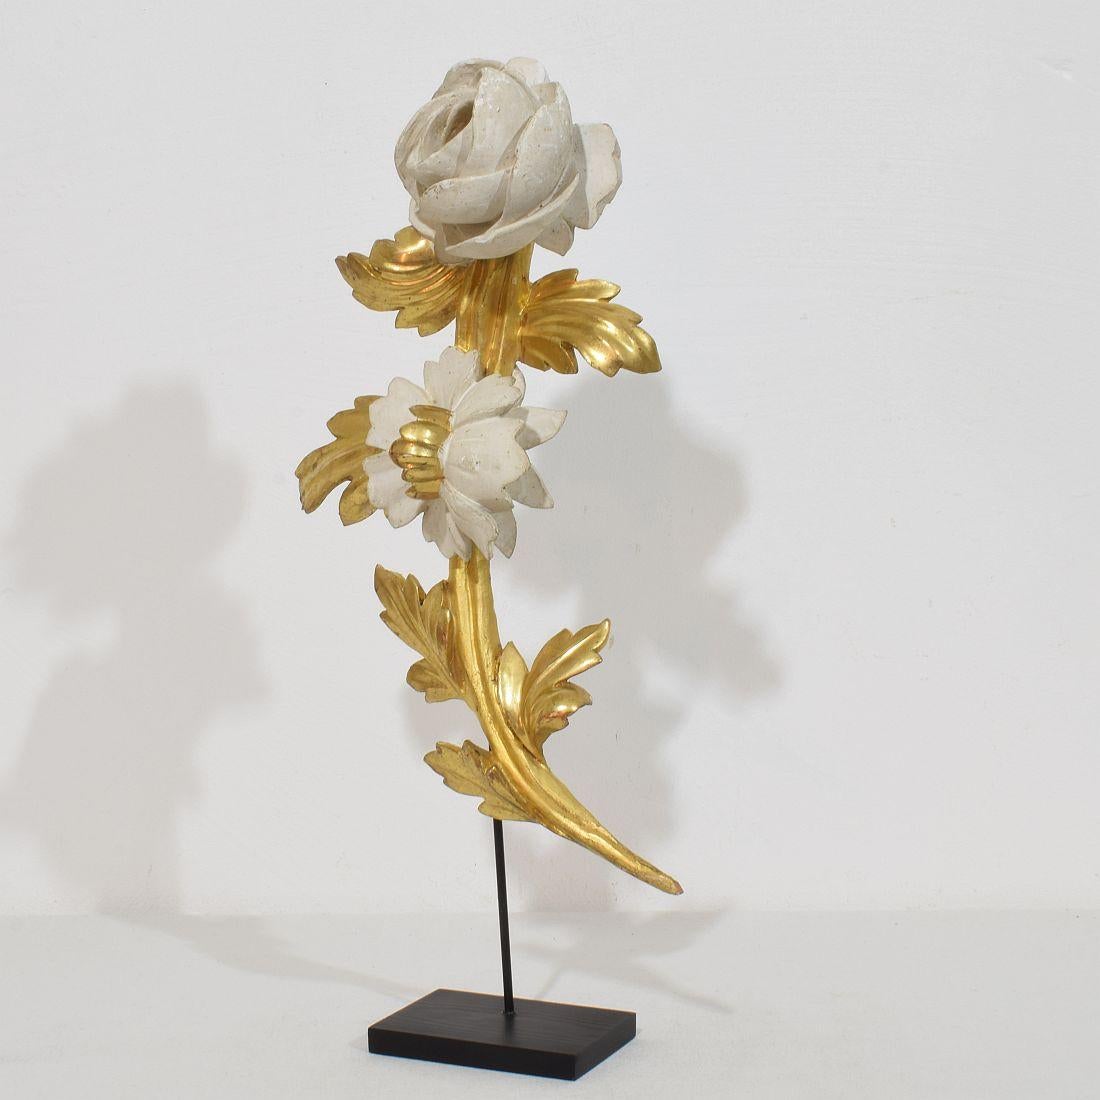 Beautiful handcarved giltwood floral ornament that once adorned a chapel .Original period piece that due it’s high age has a wonderful weathered look.
Italy circa 1780/1850 , weathered
Measurements include the wooden base.
H:43cm  W:20cm D:8cm 
